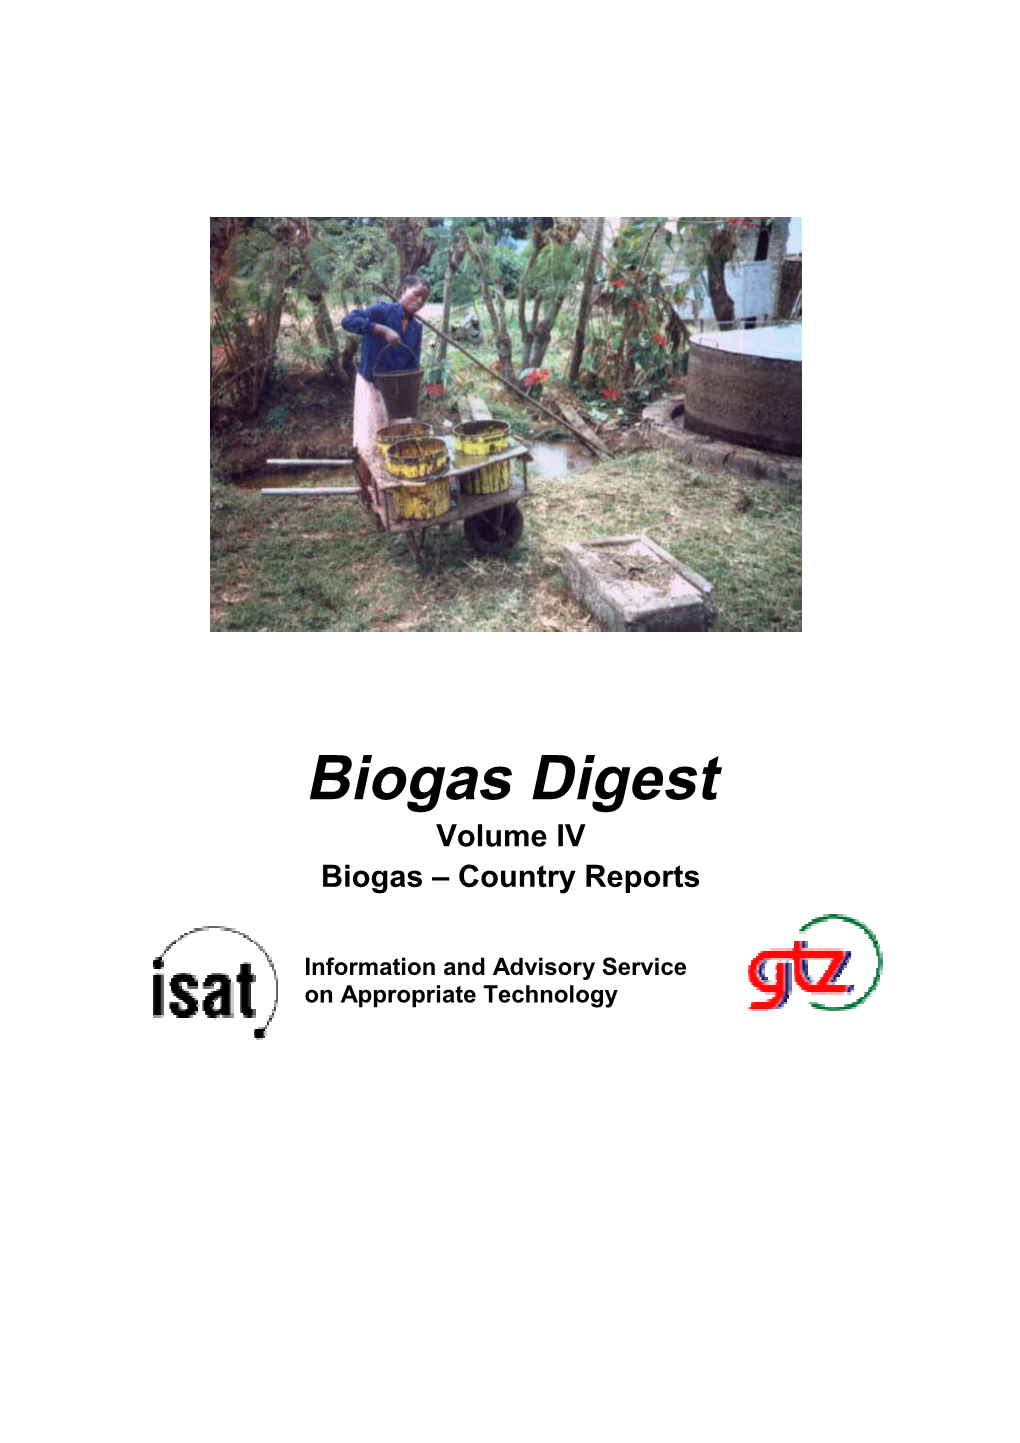 Biogas Digest Volume IV Biogas – Country Reports